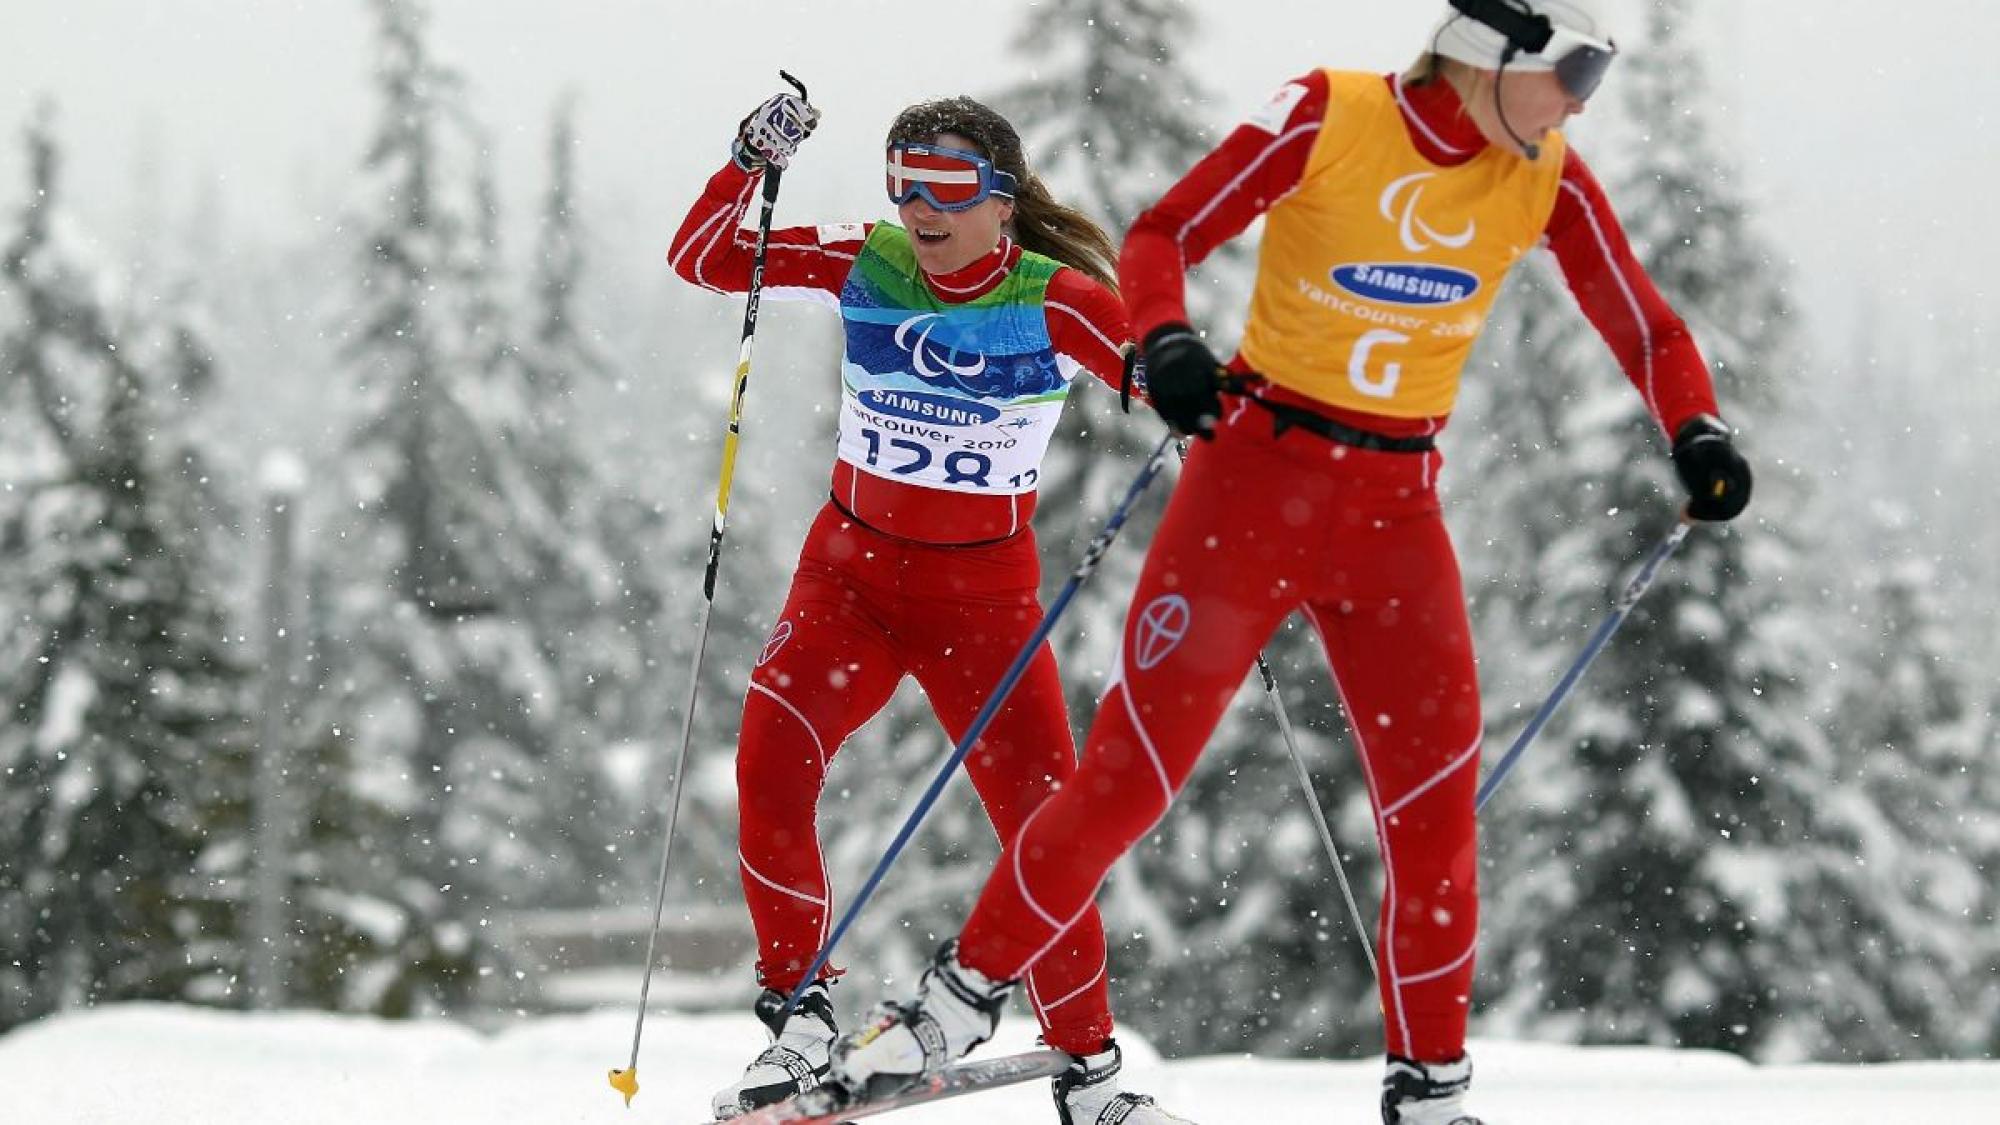 Anne-Mette Bredahl of Denmark competes during the Women's 3km Pursuit Visually Impaired Biathlon on Day 2 of the 2010 Vancouver Winter Paralympics